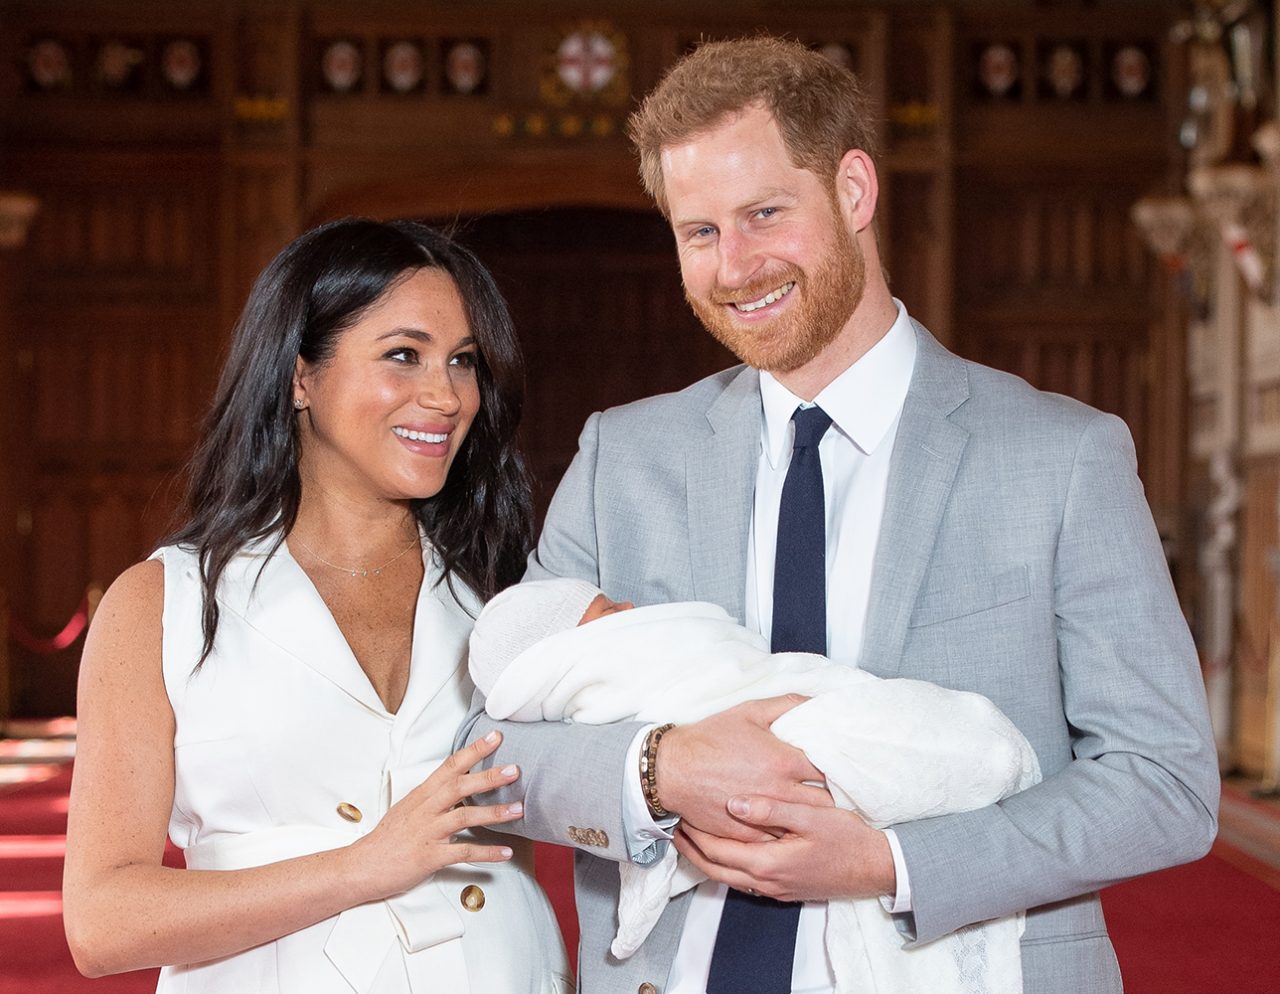 The Duke and Duchess Of Sussex Pose With Their Newborn Son